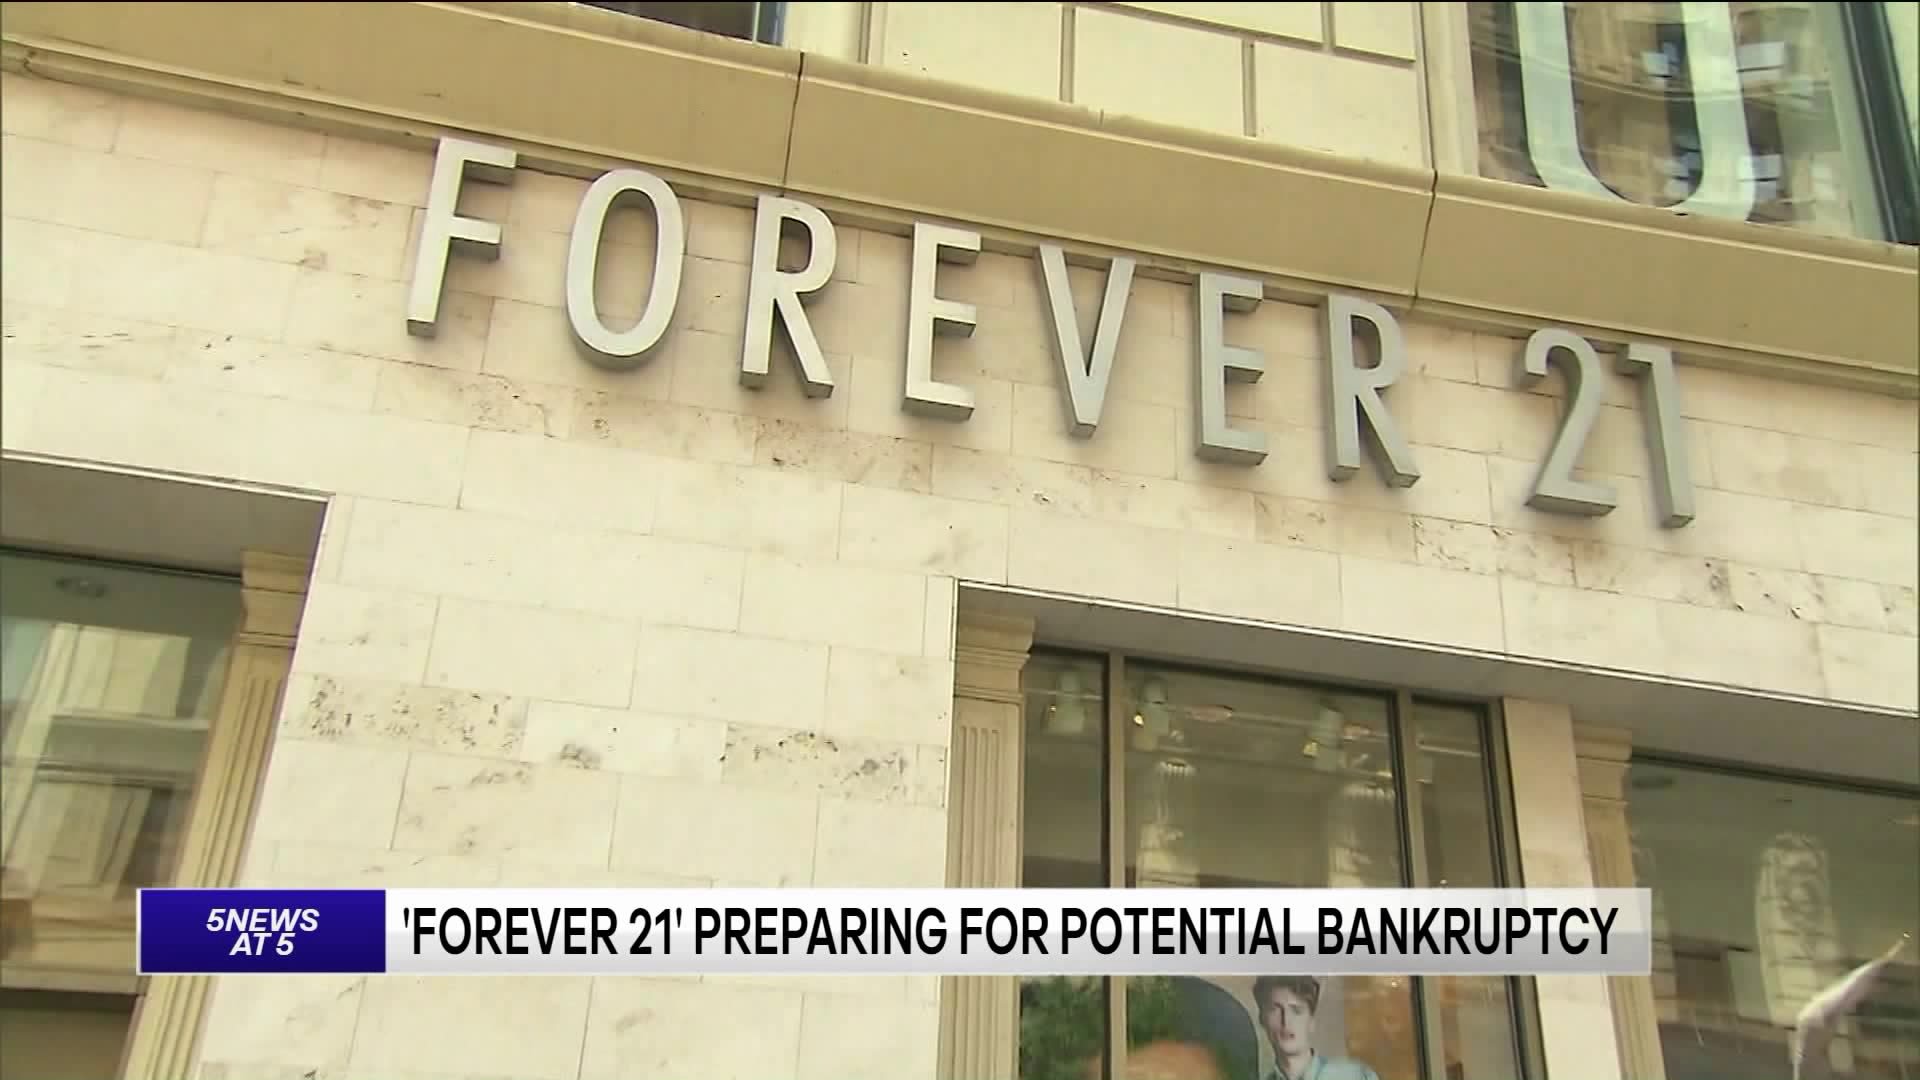 Teen Clothing Retailer Forever 21 Reportedly Preparing To File For Bankruptcy